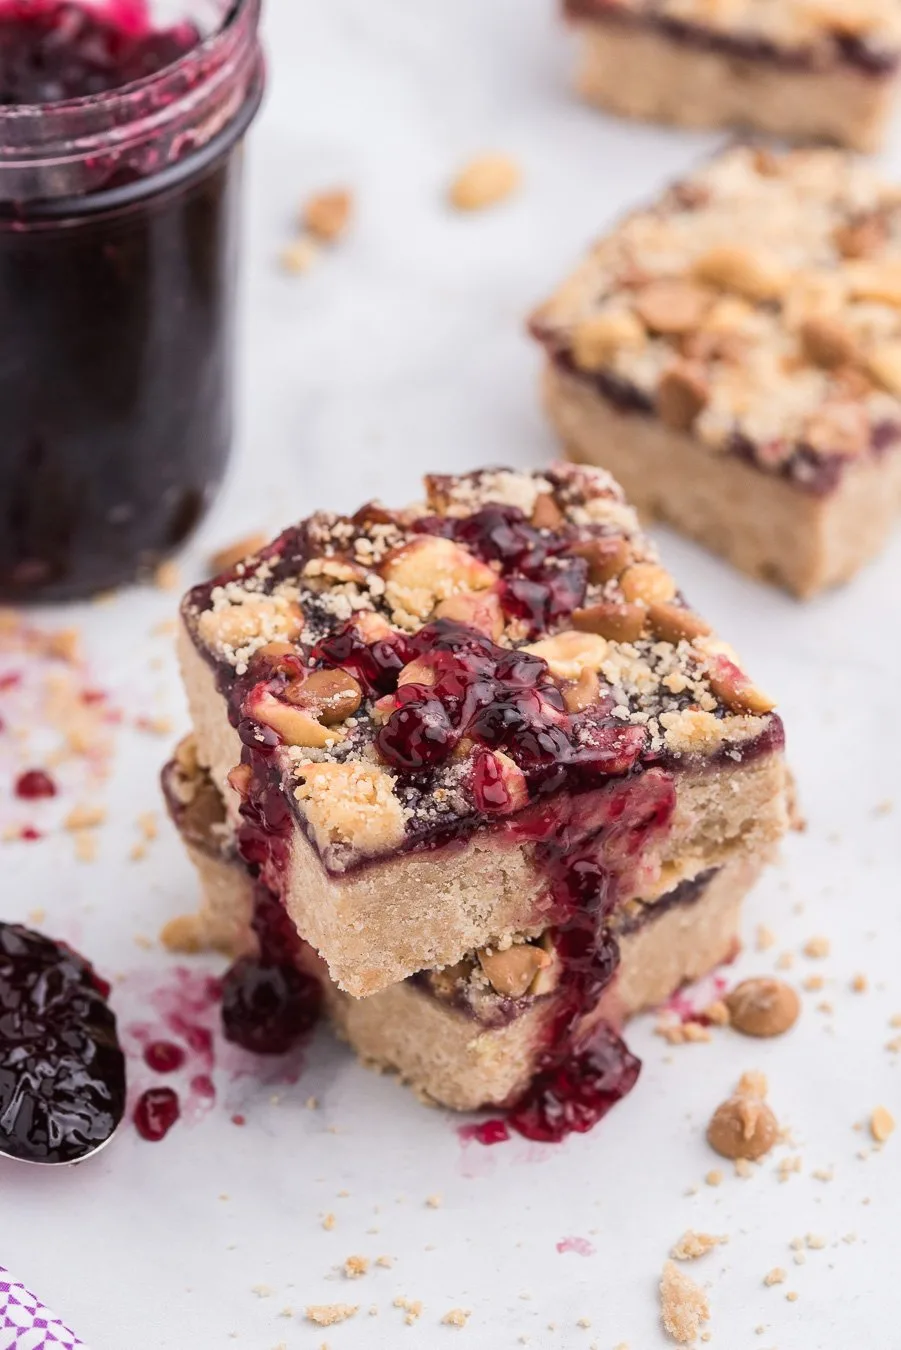 peanut butter and jelly bars with oozing jelly, chopped peanuts and peanut butter chips. jar of jelly in background